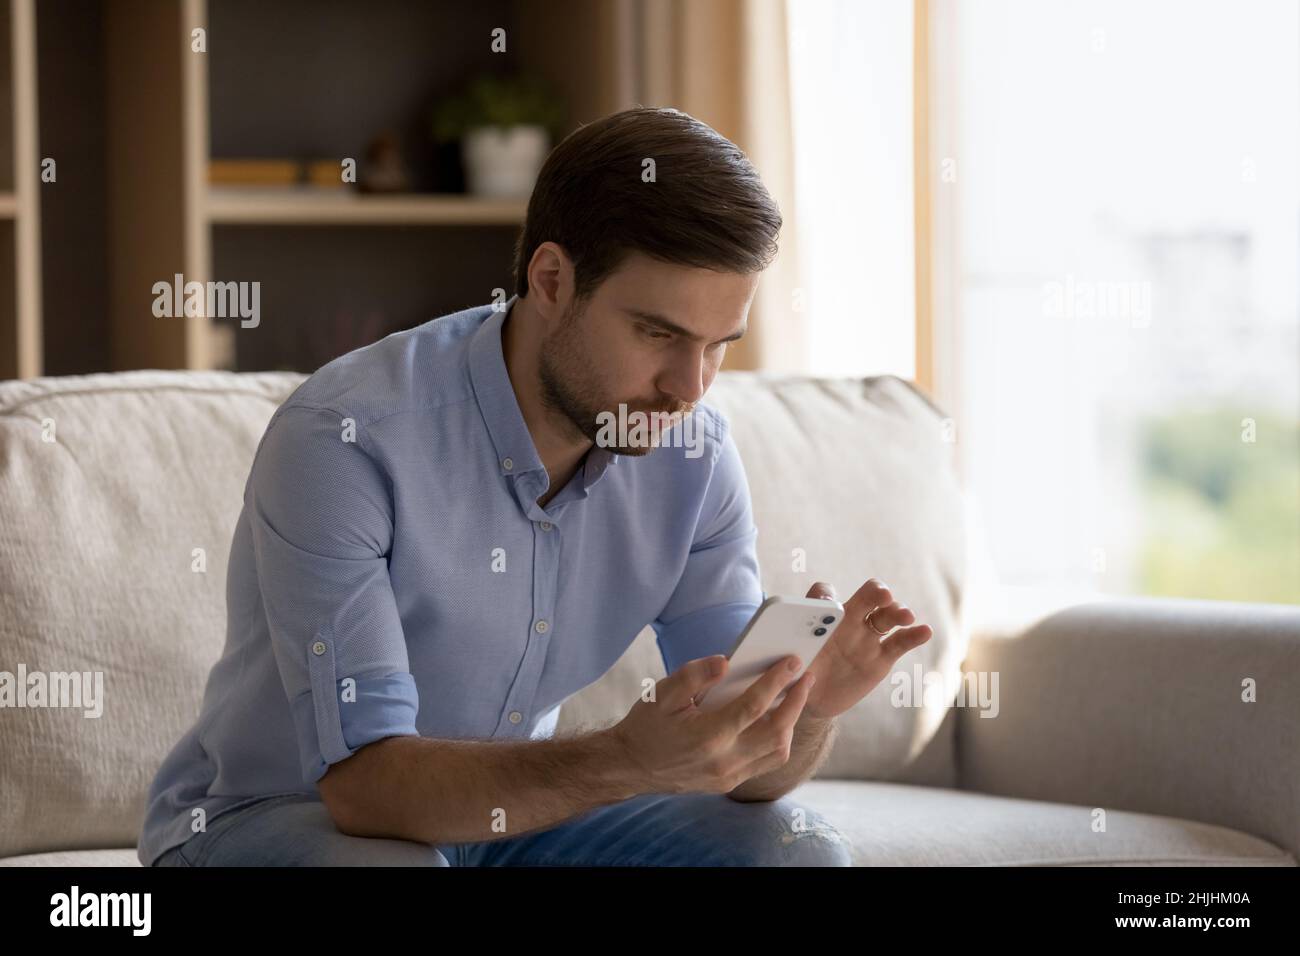 Concentrated young man using smartphone at home. Stock Photo